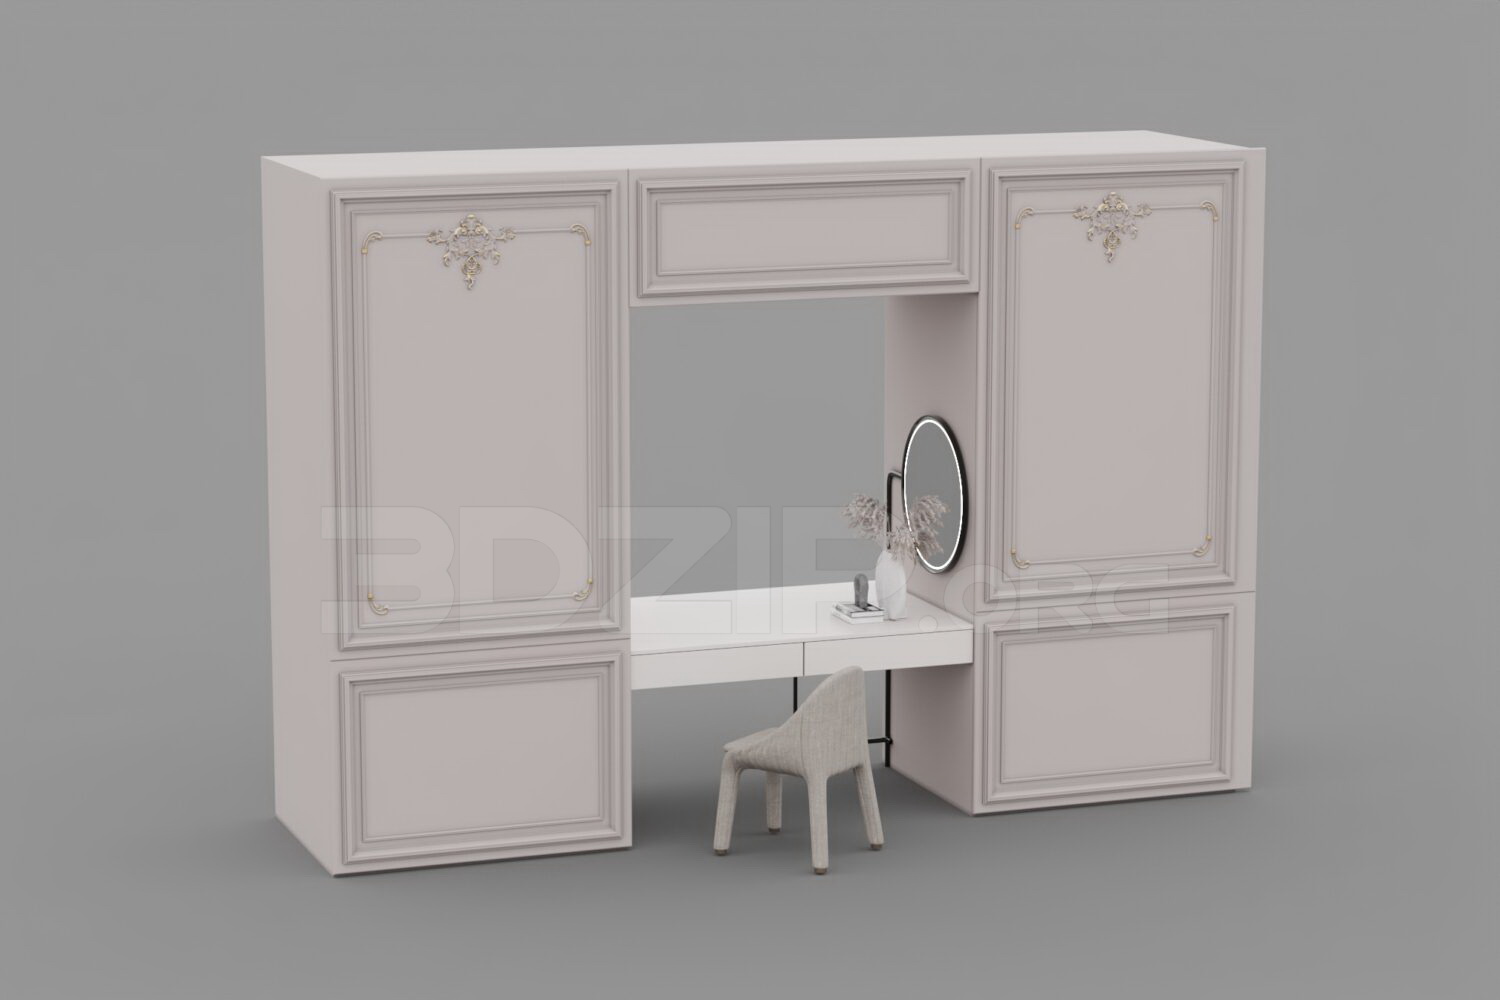 2108. Free 3D Dressing Table Model Download